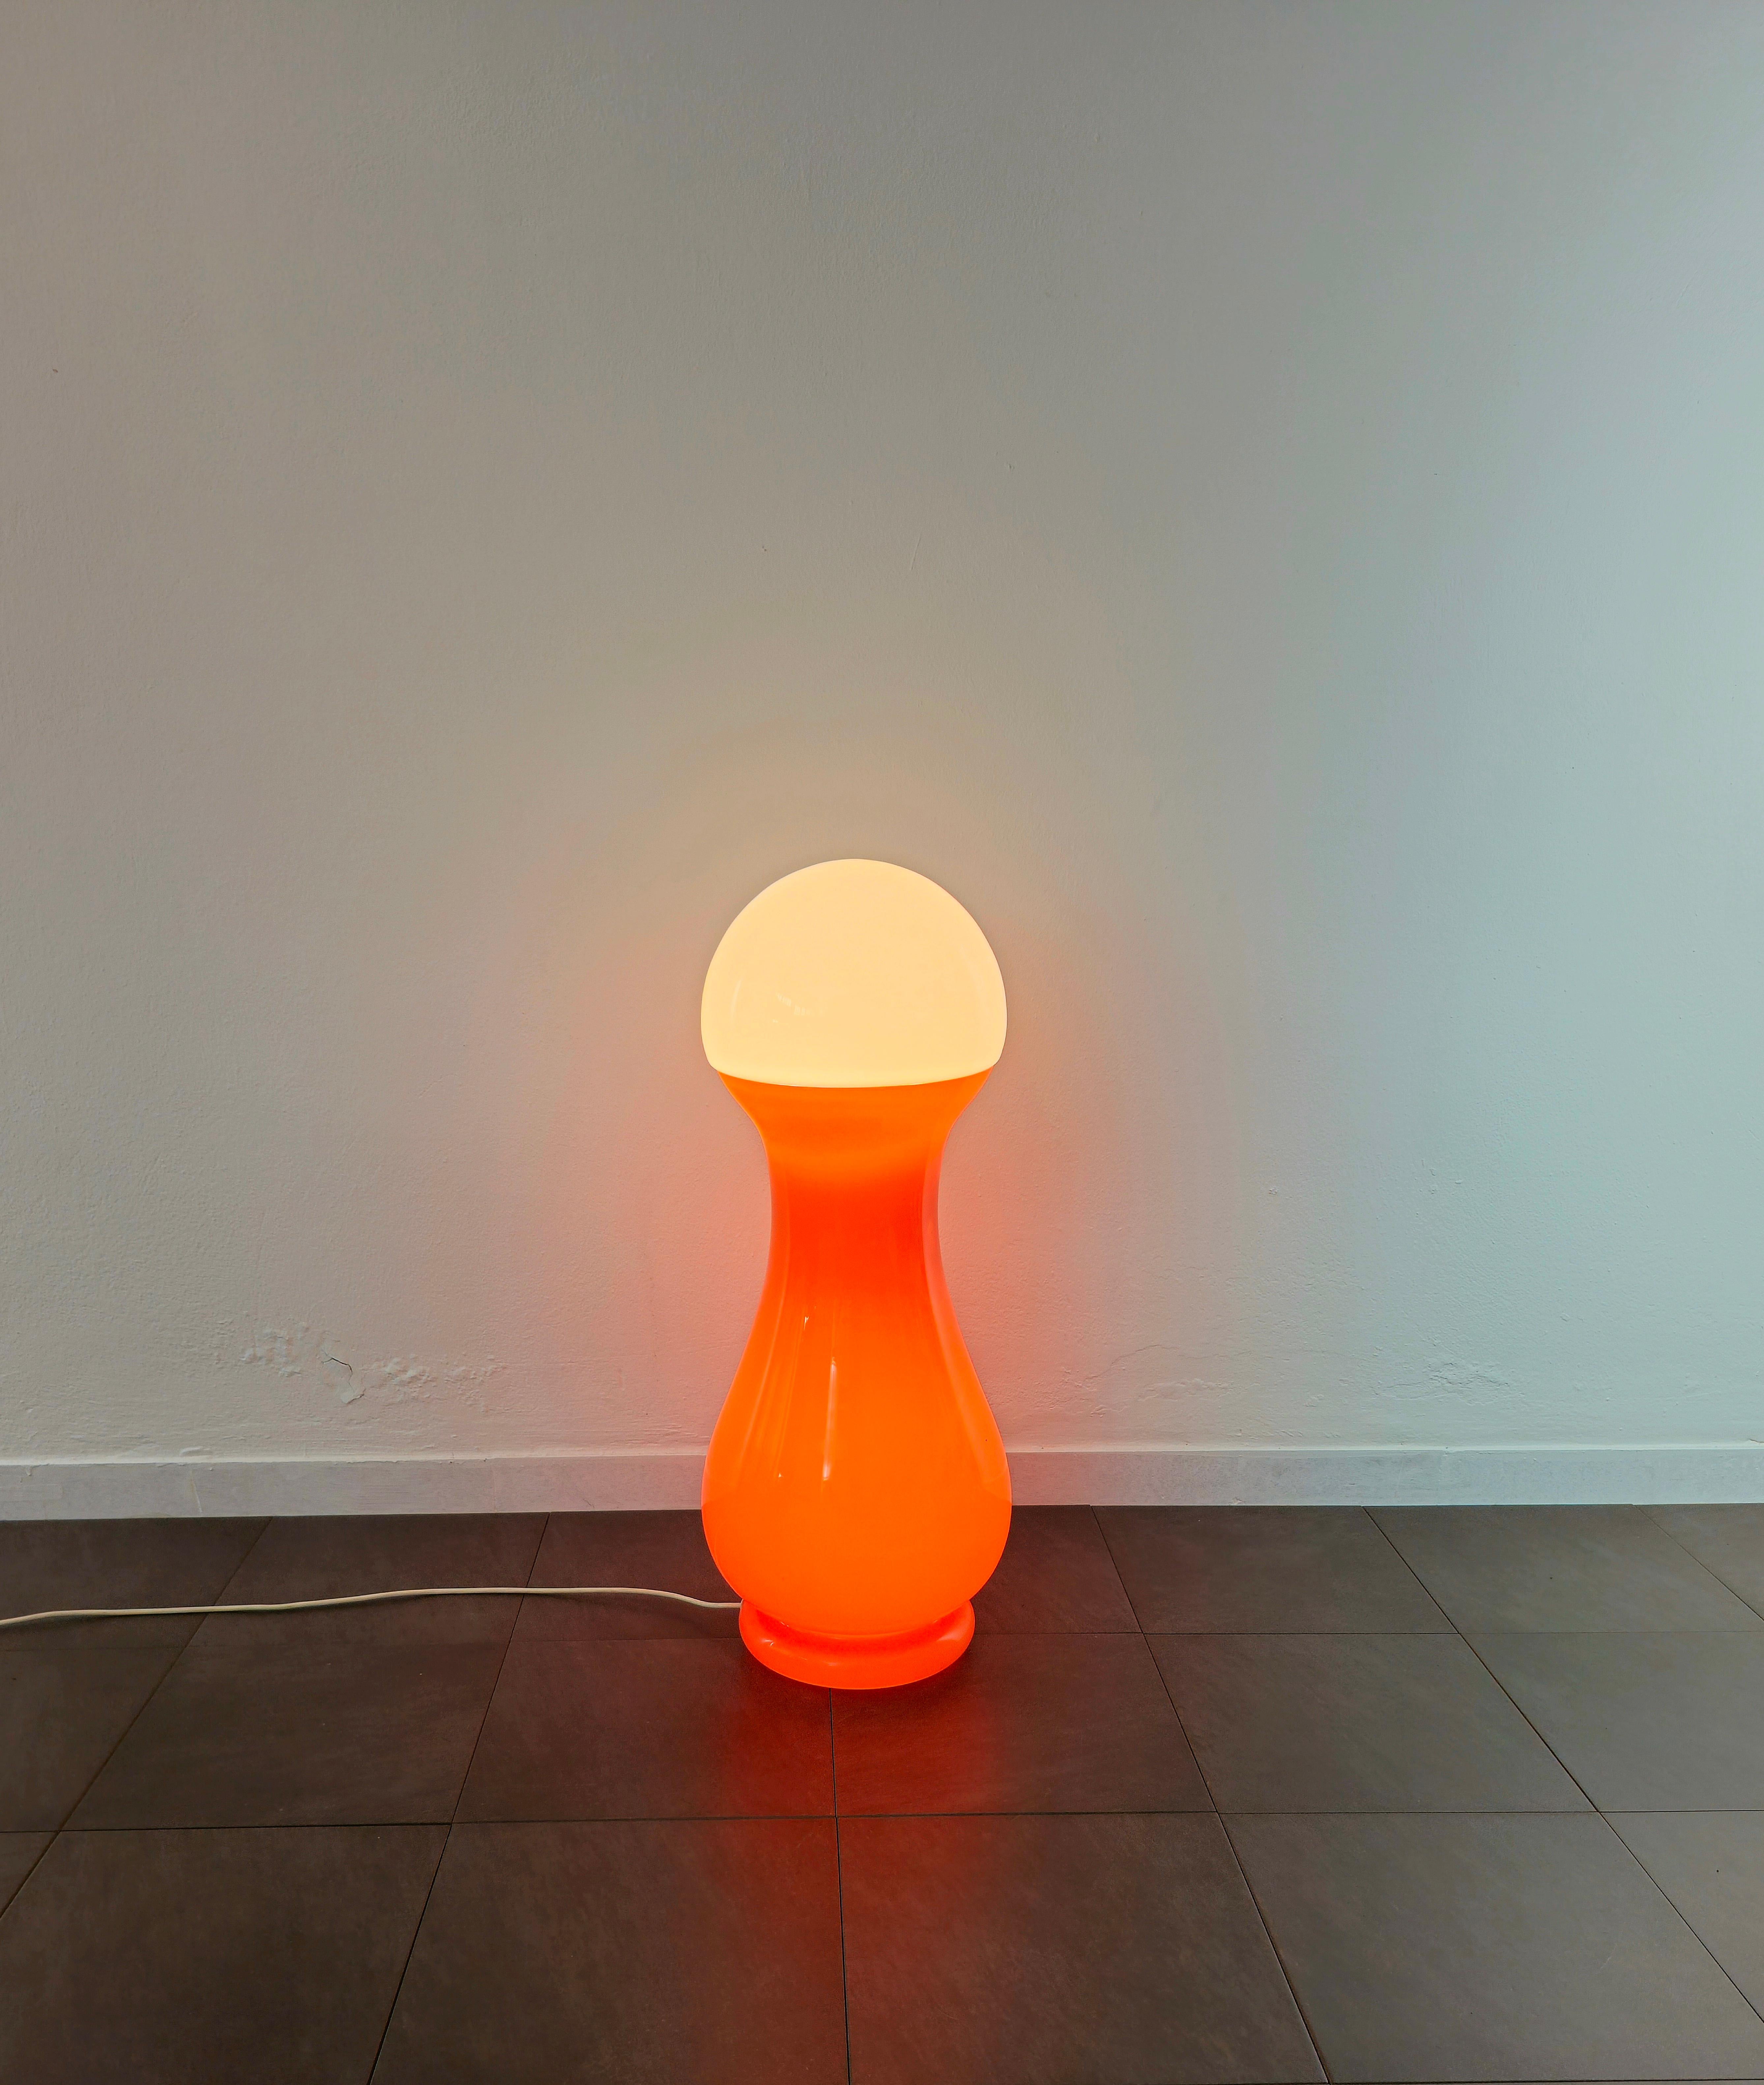 Rare Floor lamp designed by Carlo Nason and produced in Italy in the 70s by Mazzega.
The lamp was made with 2 Murano glass diffusers, the lower one in the shade of orange and the upper one in the shape of a half sphere in the shade of milky white.